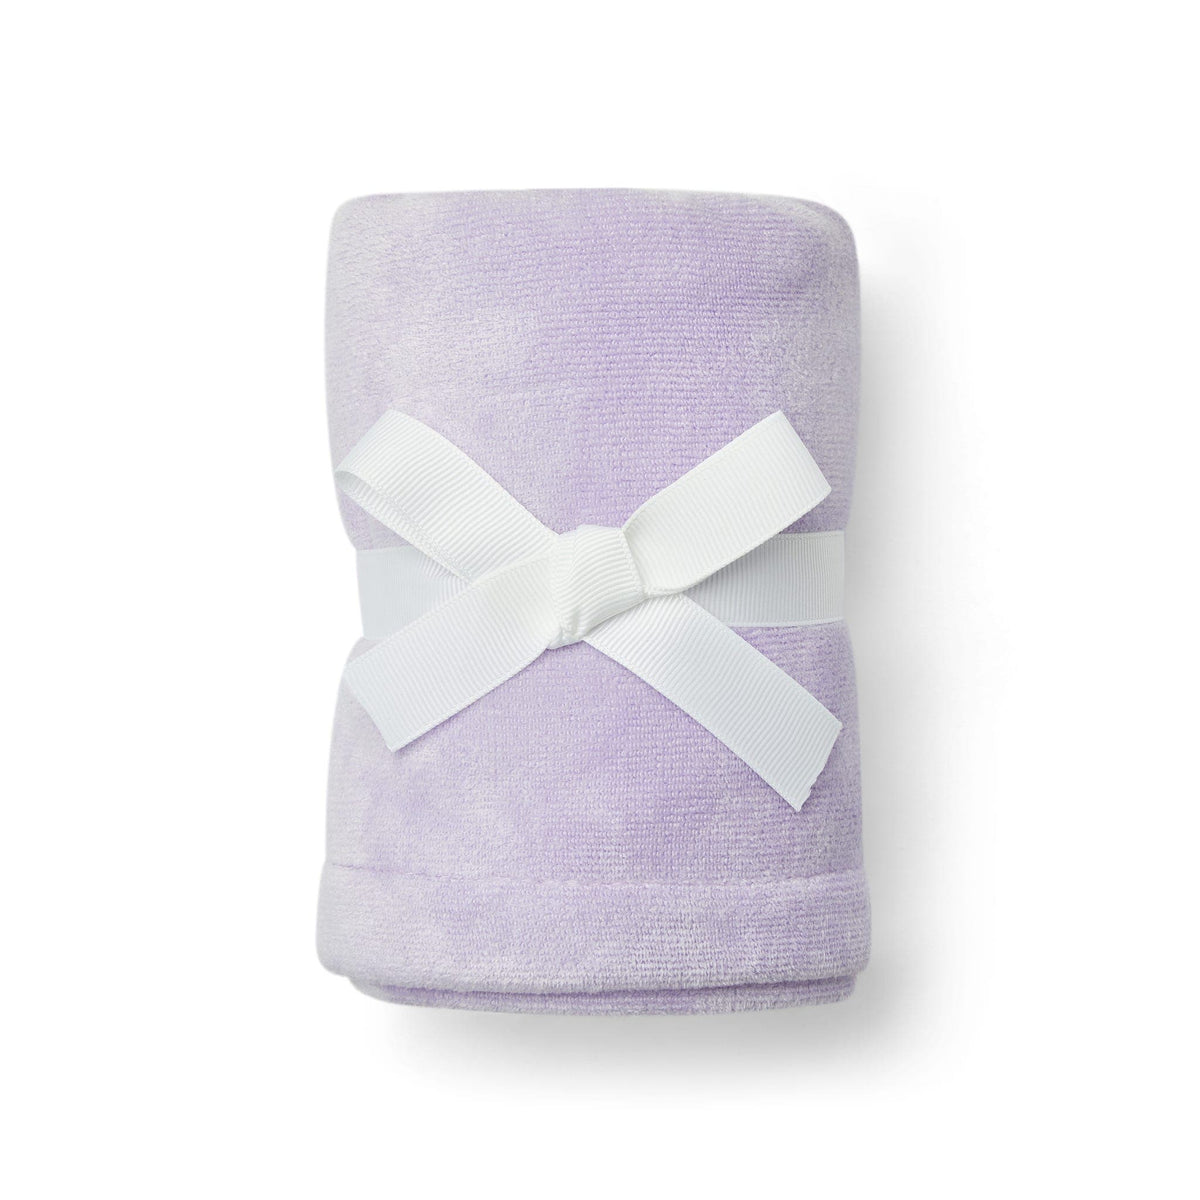 Only Curls Towel Turban - Lilac - Only Curls